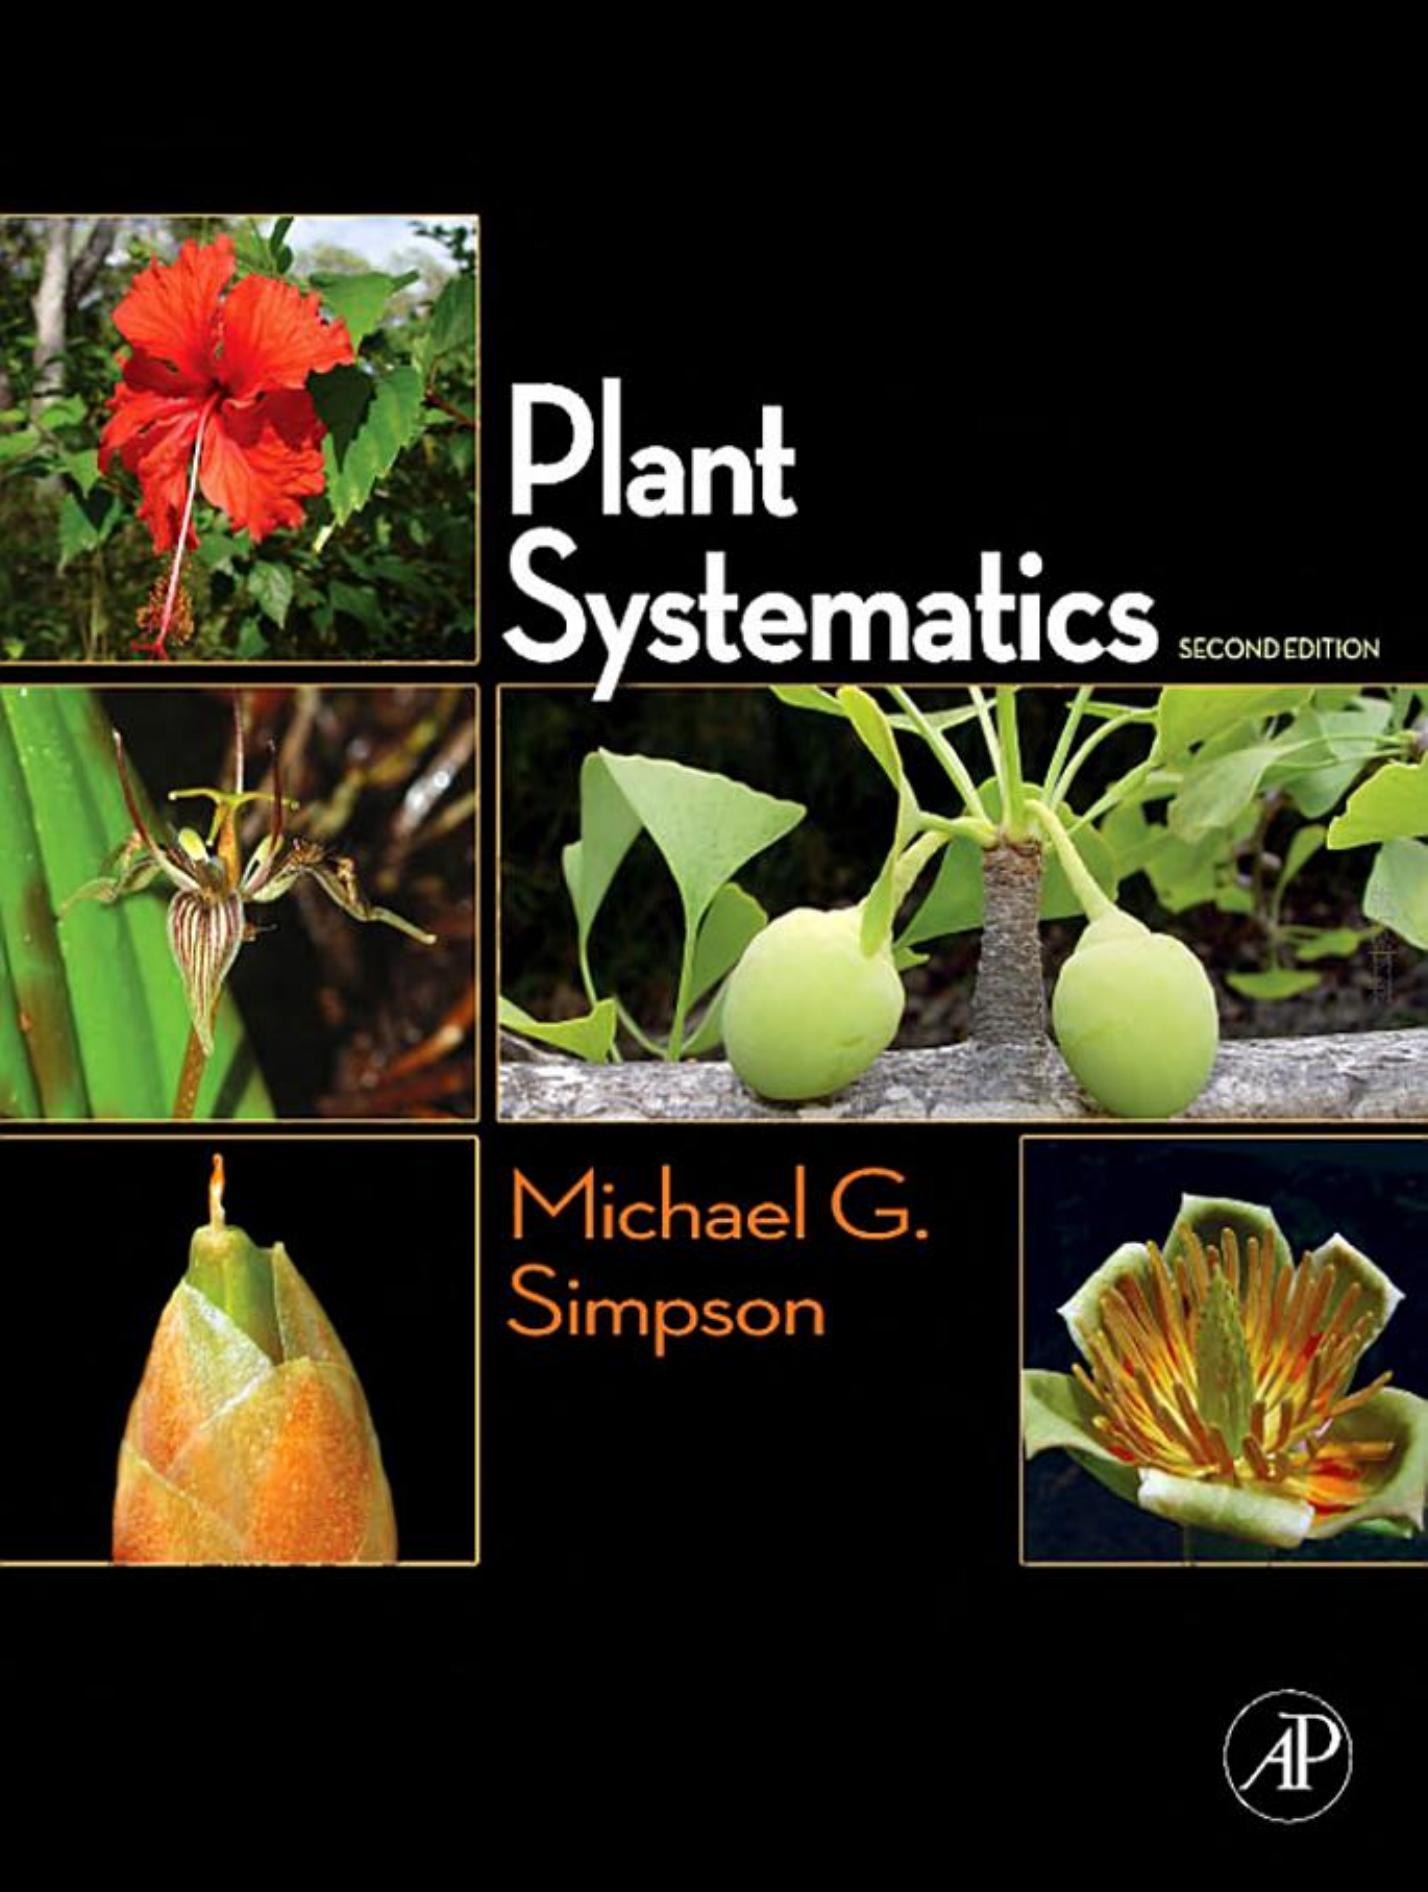 Plant Systematics, Second Edition 2010